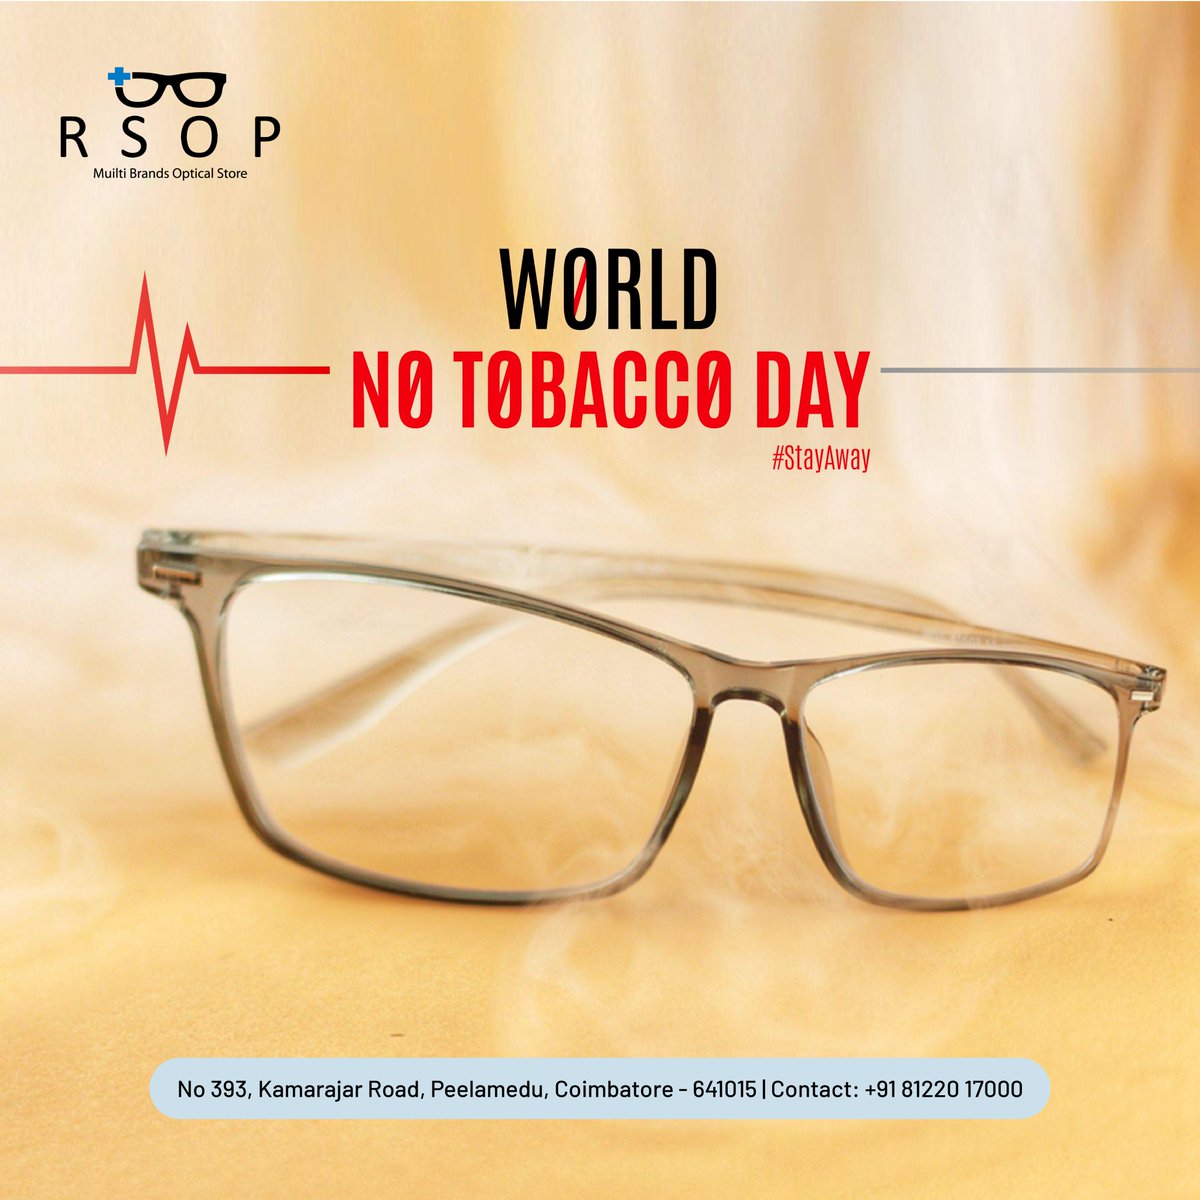 Let World No-Tobacco Day ignite a healthier path, where our optical lenses illuminate a future of clarity and well-being.
.
.
.
.
.
.
.
.
.
.
#eyewear #eyeproblems #glasses #glassesstyle #glassesfashion #opticalshop #opticalframes #opticalglasses #SayNoToTobacco #NoTobaccoDay